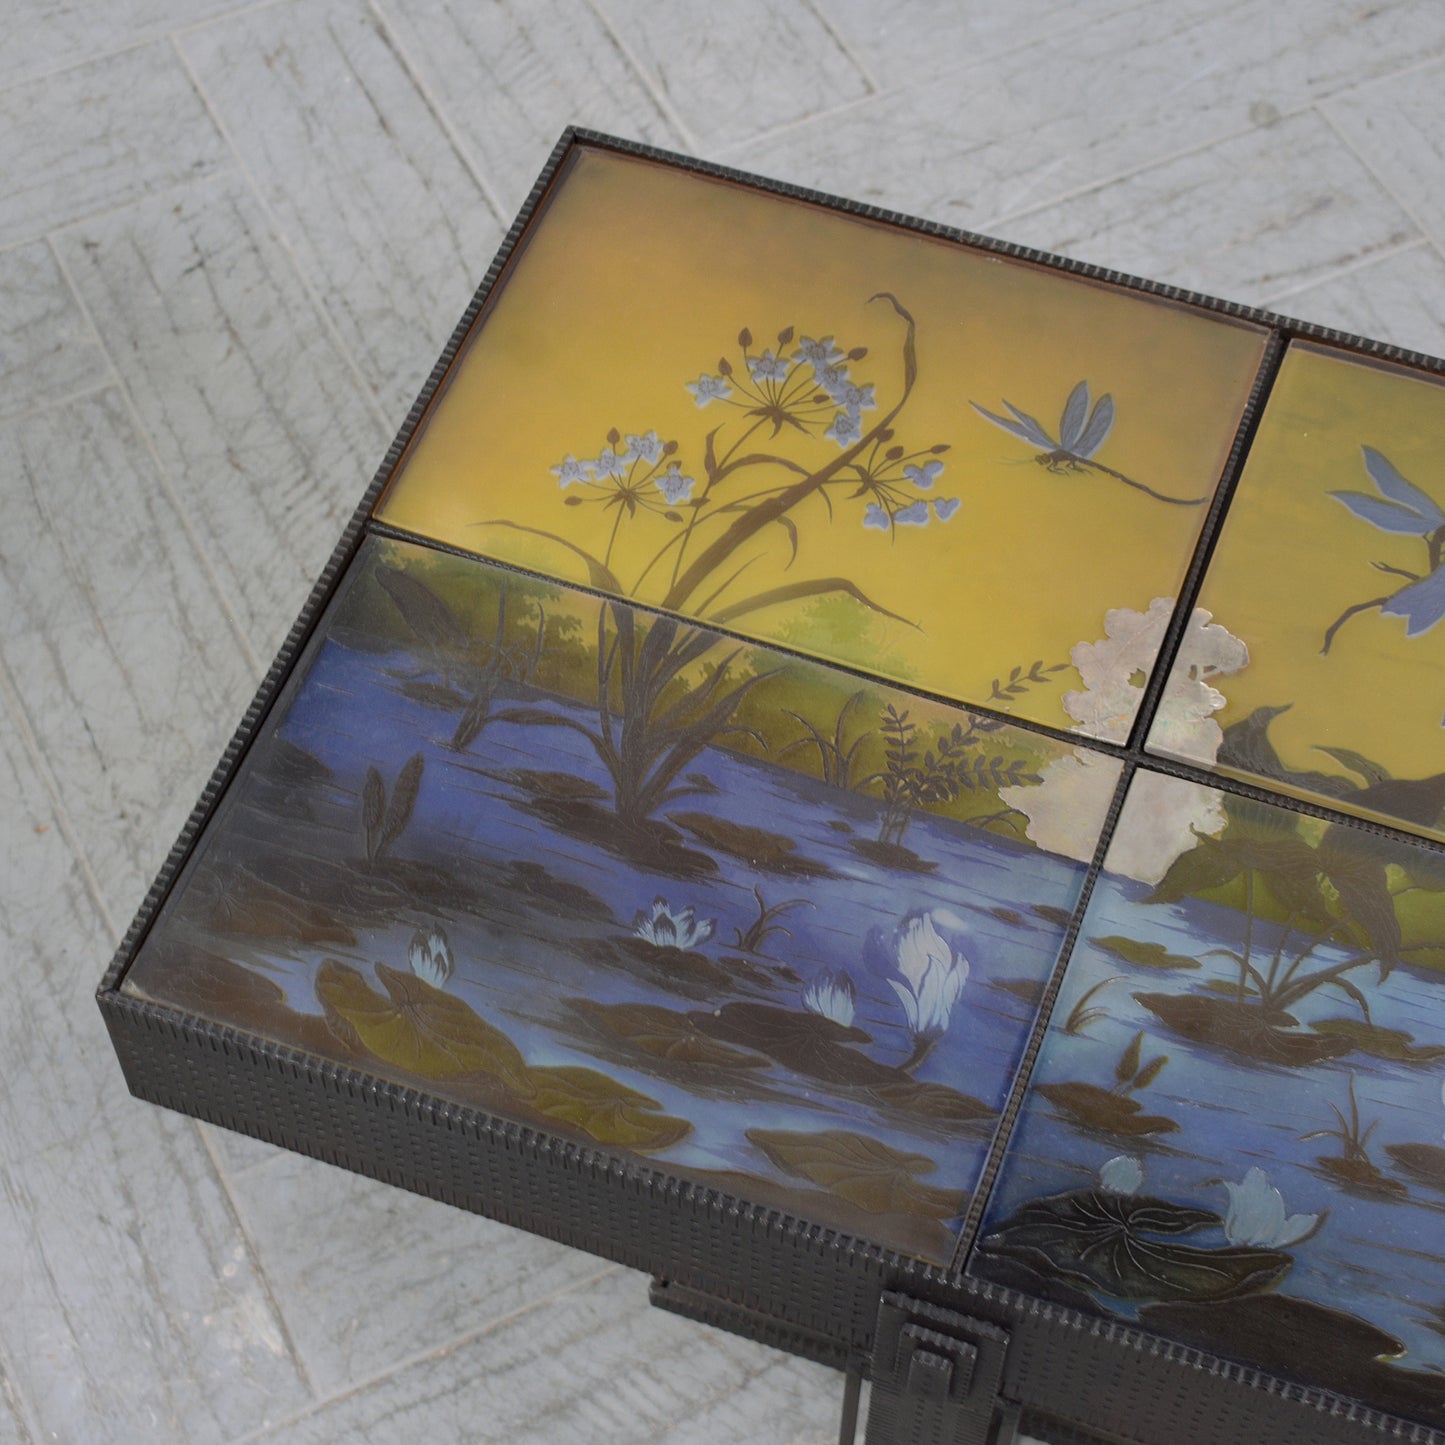 1970s Art Deco Side Table: Vintage Iron & Glass with Intricate Nature Scenes